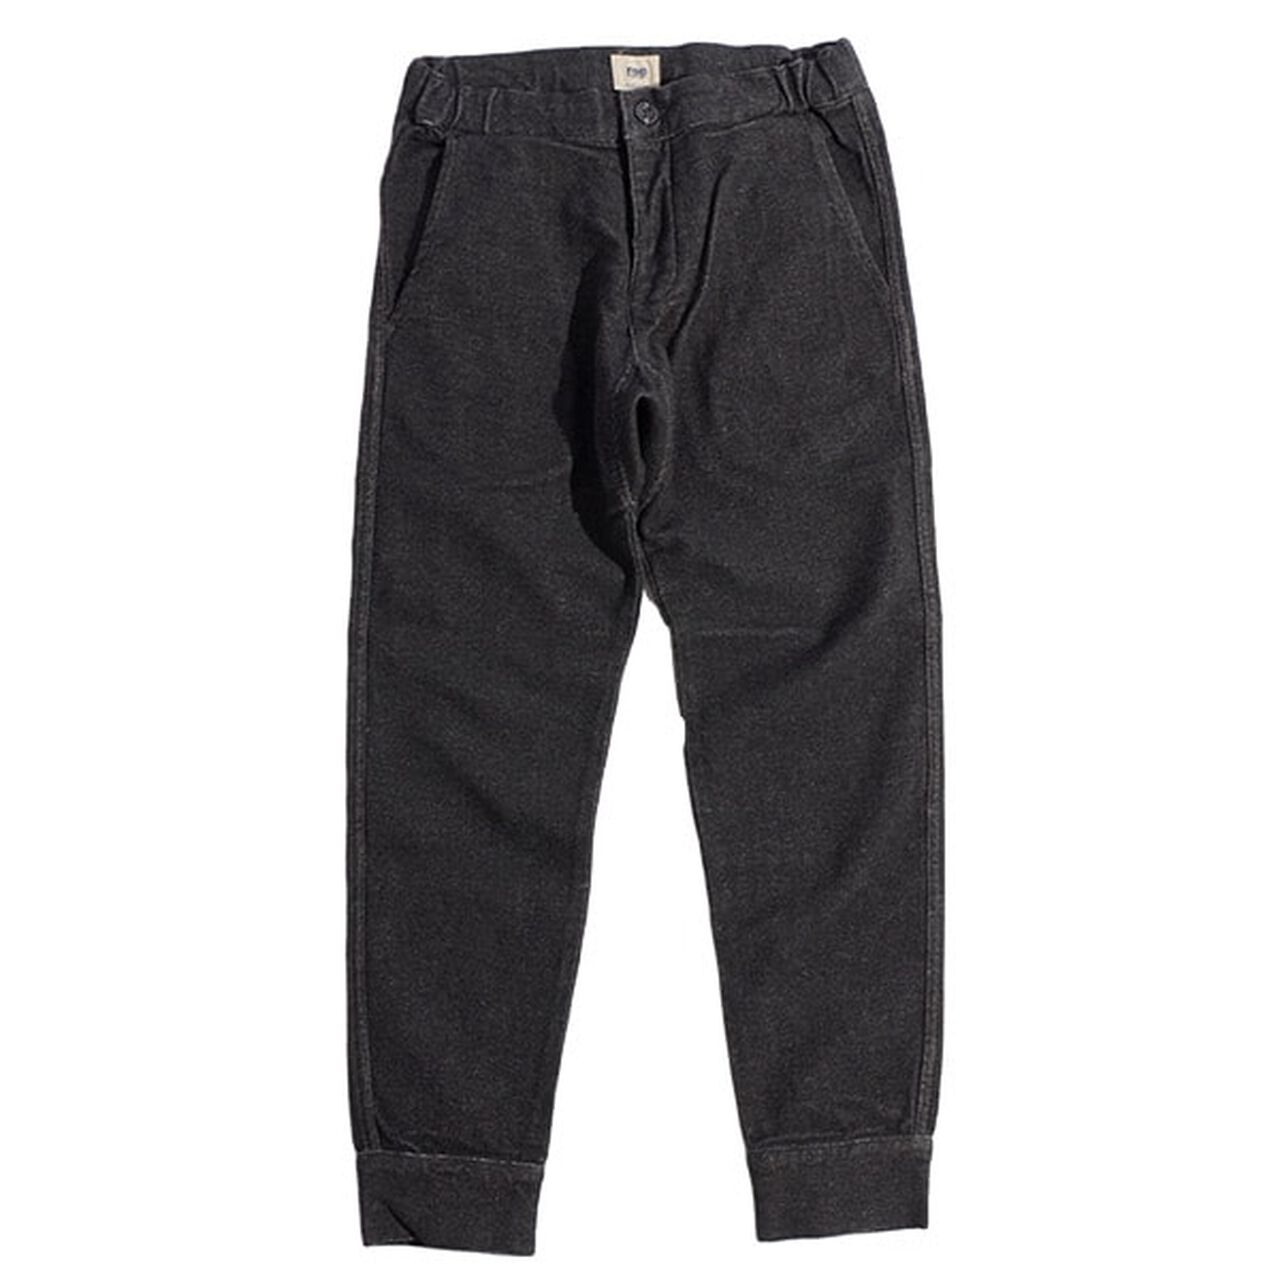 F0404/F403 Relaxed sweatpants,Charcoal, large image number 0